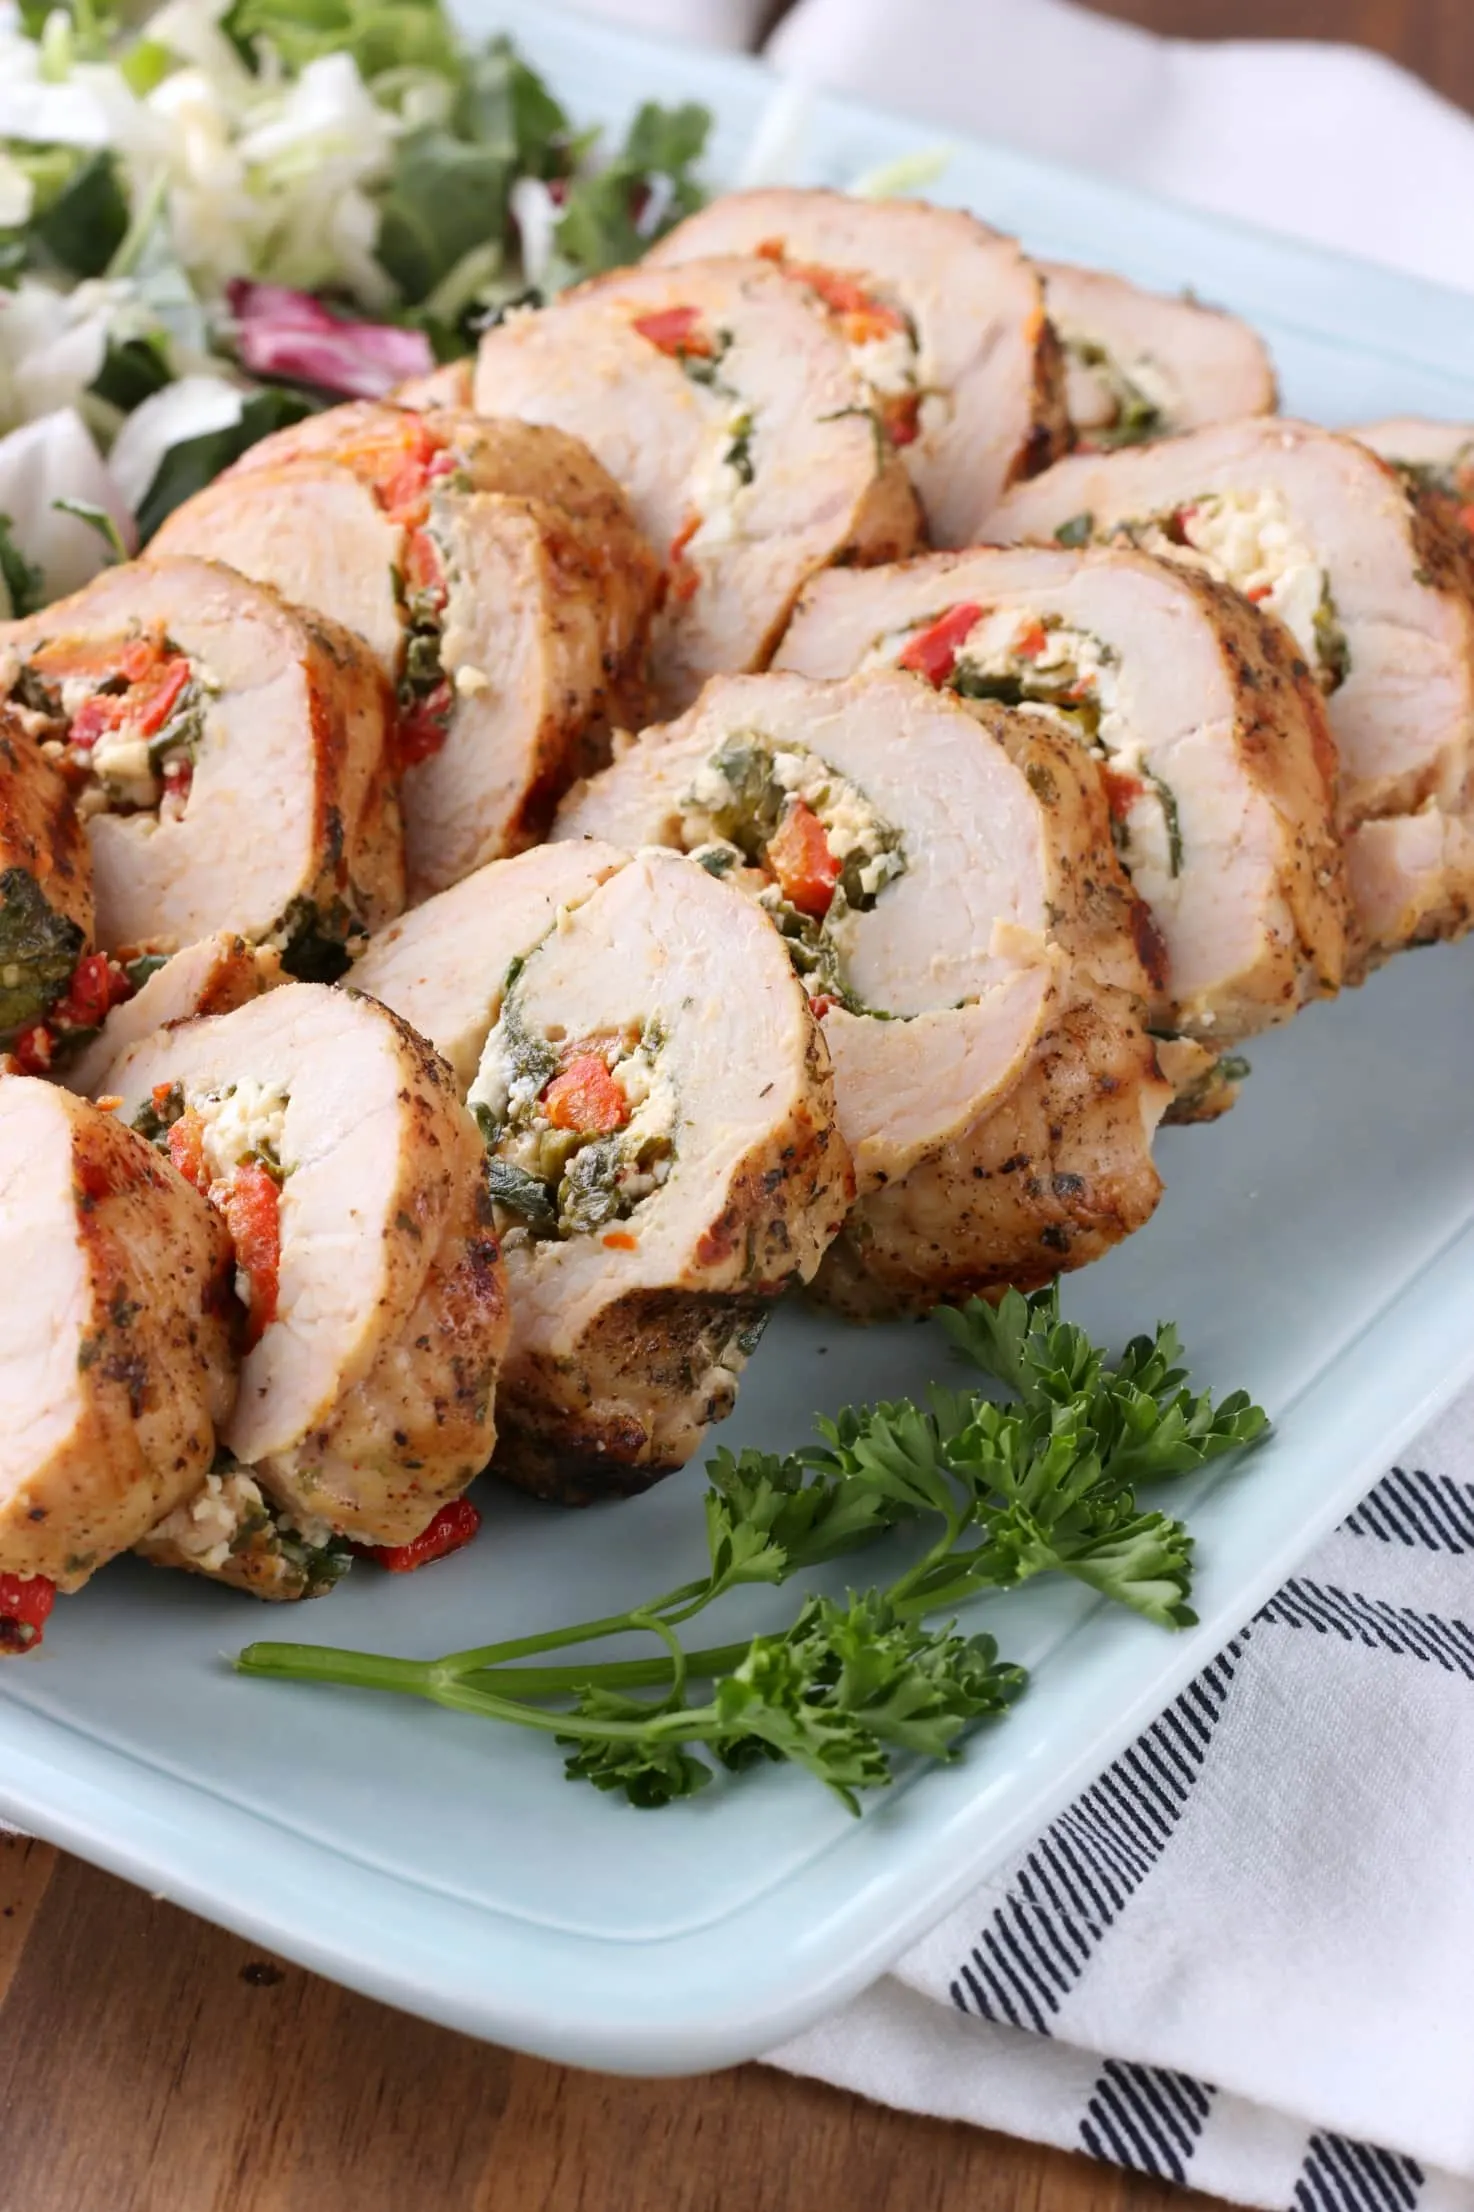 Recipe for Grilled Spinach Feta Red Pepper Stuffed Turkey Tenderloin from A Kitchen Addiction